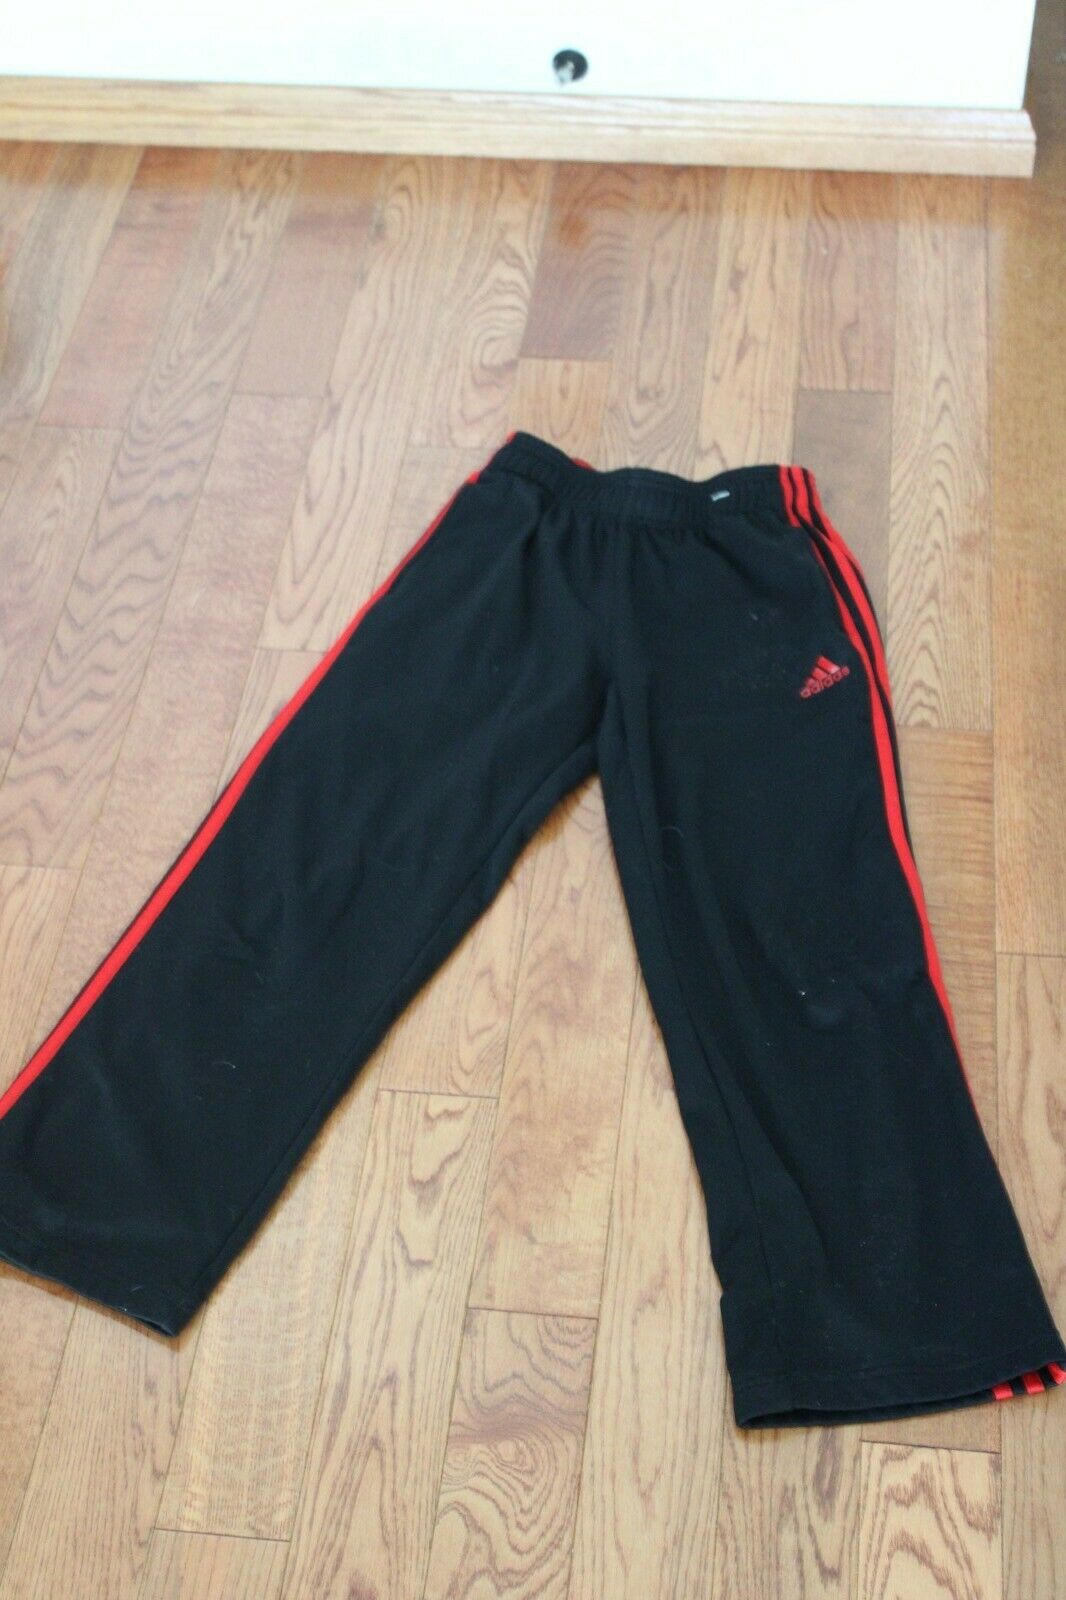 Adidas Youth Pants Size 10, Black With Red Stripes